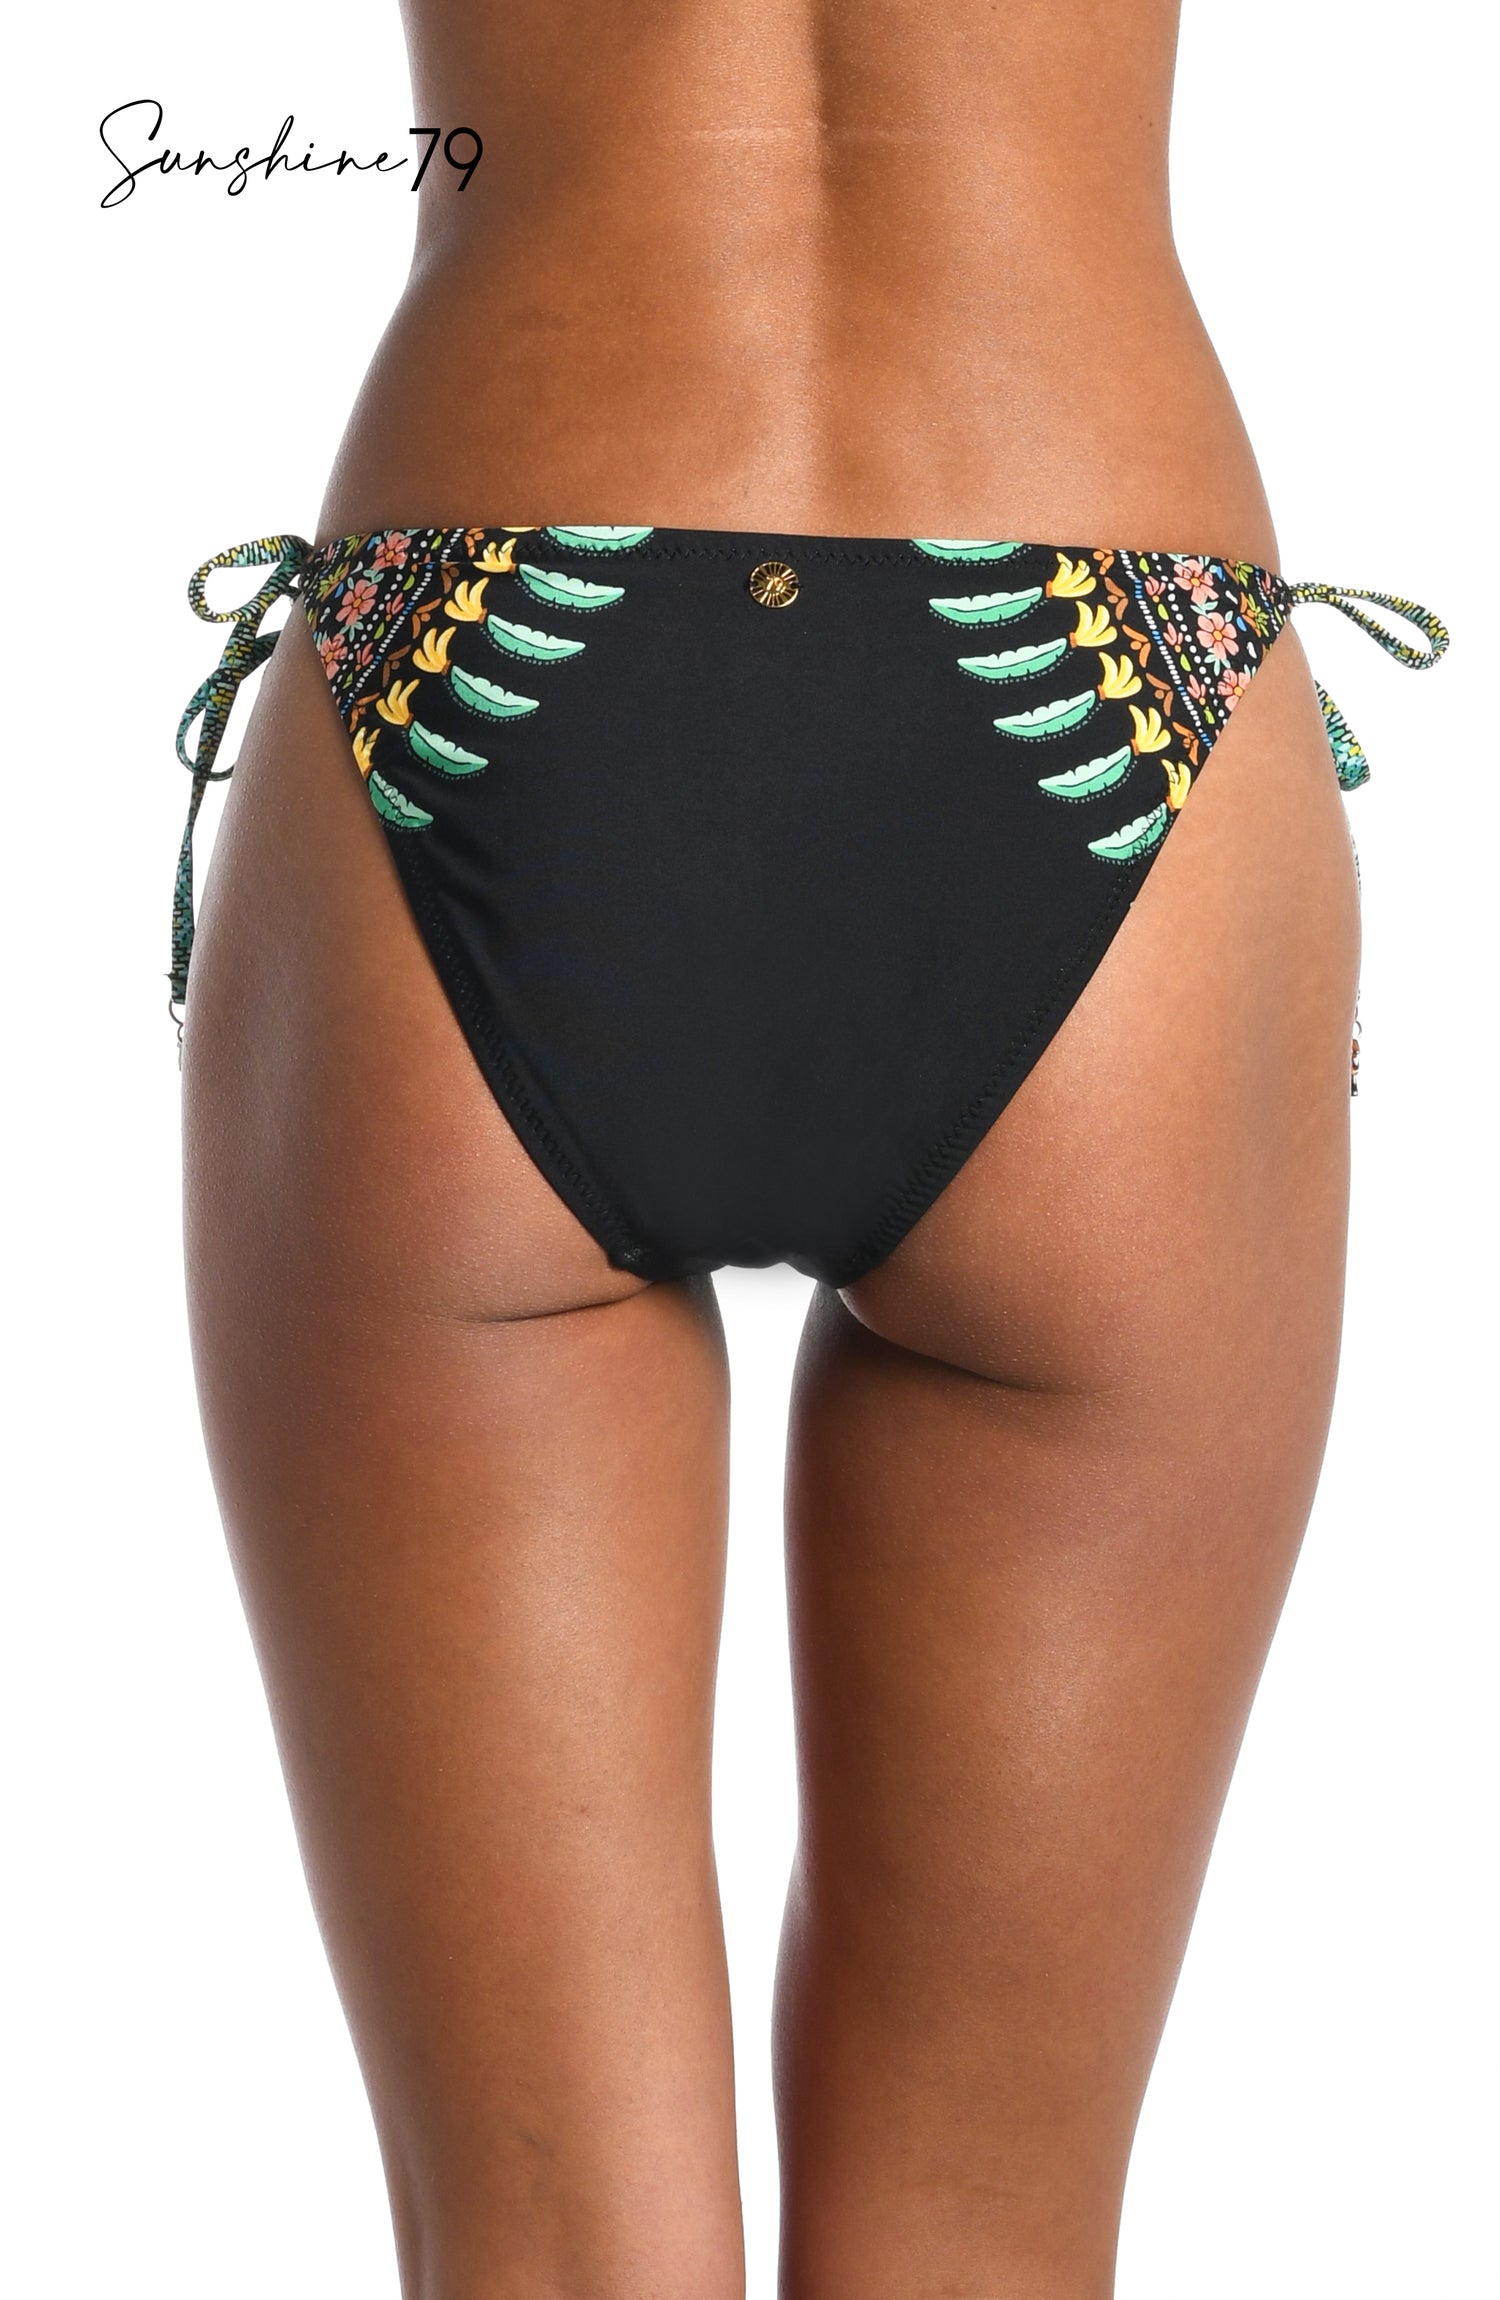 Model is wearing a black multicolored palm tree printed tie side hipster bikini bottom from our Sunshine 79 brand.